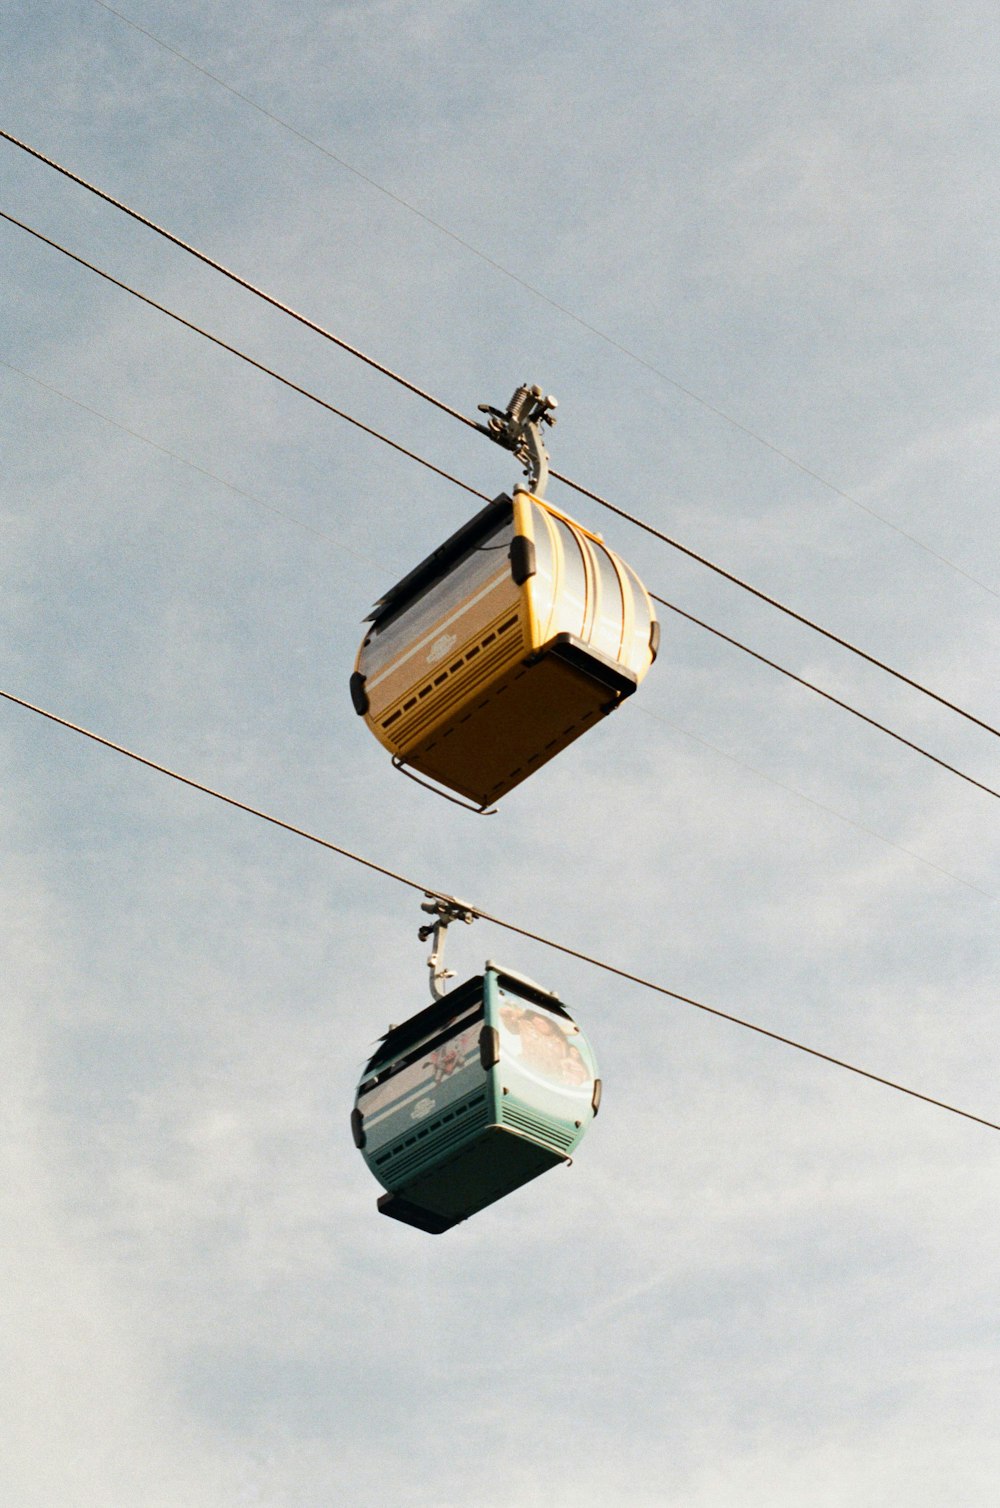 a couple of gondolas hanging from a wire